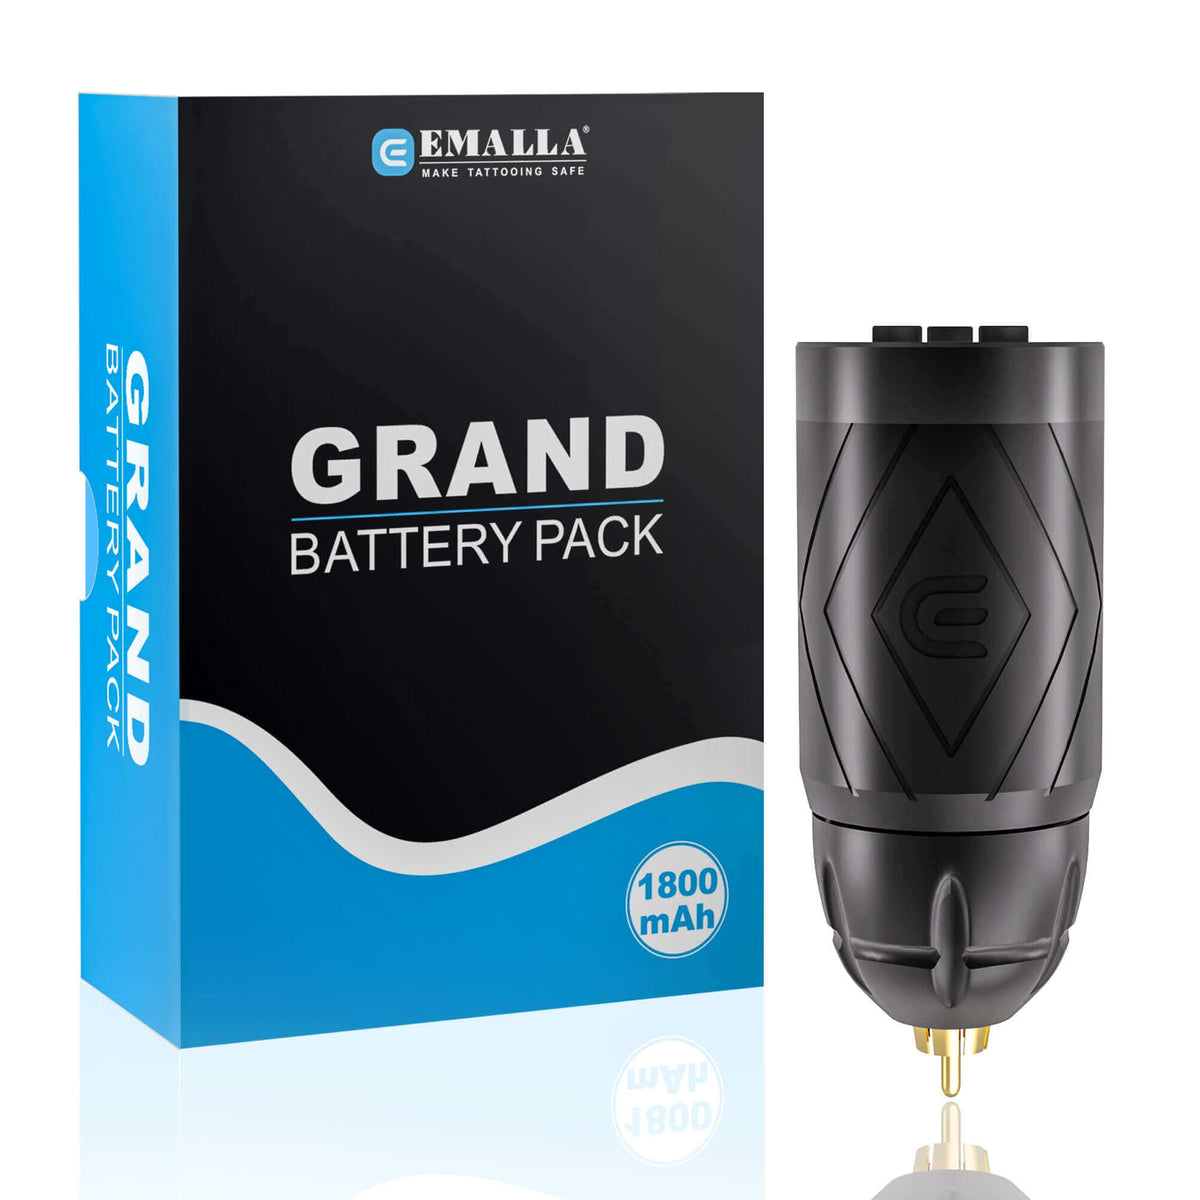 Individual package of battery pack in EMALLA GRAND Wireless Tattoo Pen Machine